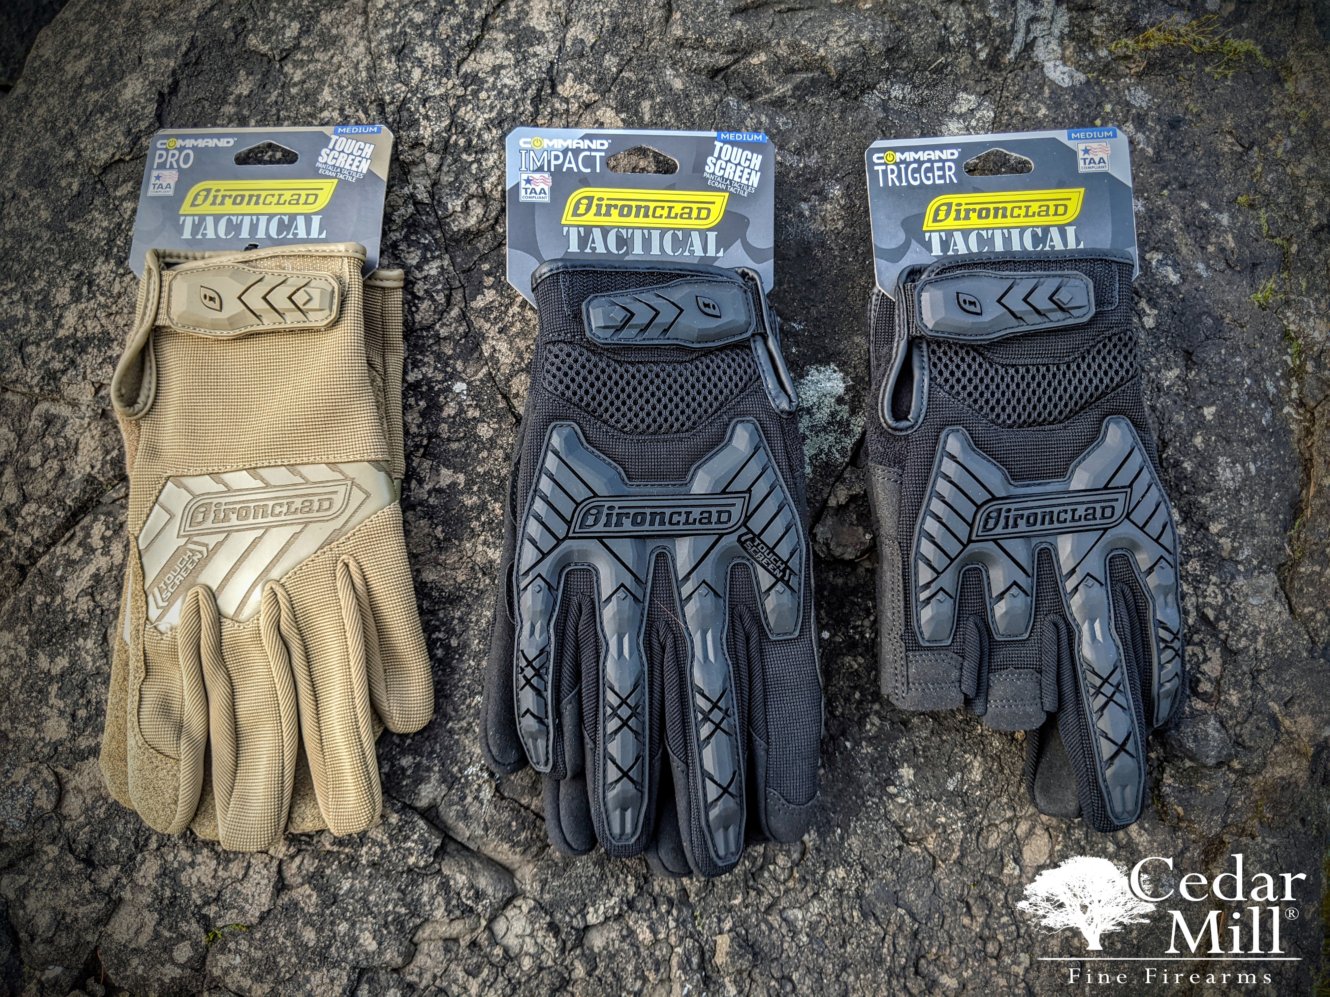 https://cedarmillfirearms.com/product_images/uploaded_images/ironclad-tactical-gloves-coyote-and-black-pro-impact-and-trigger-1-.jpg